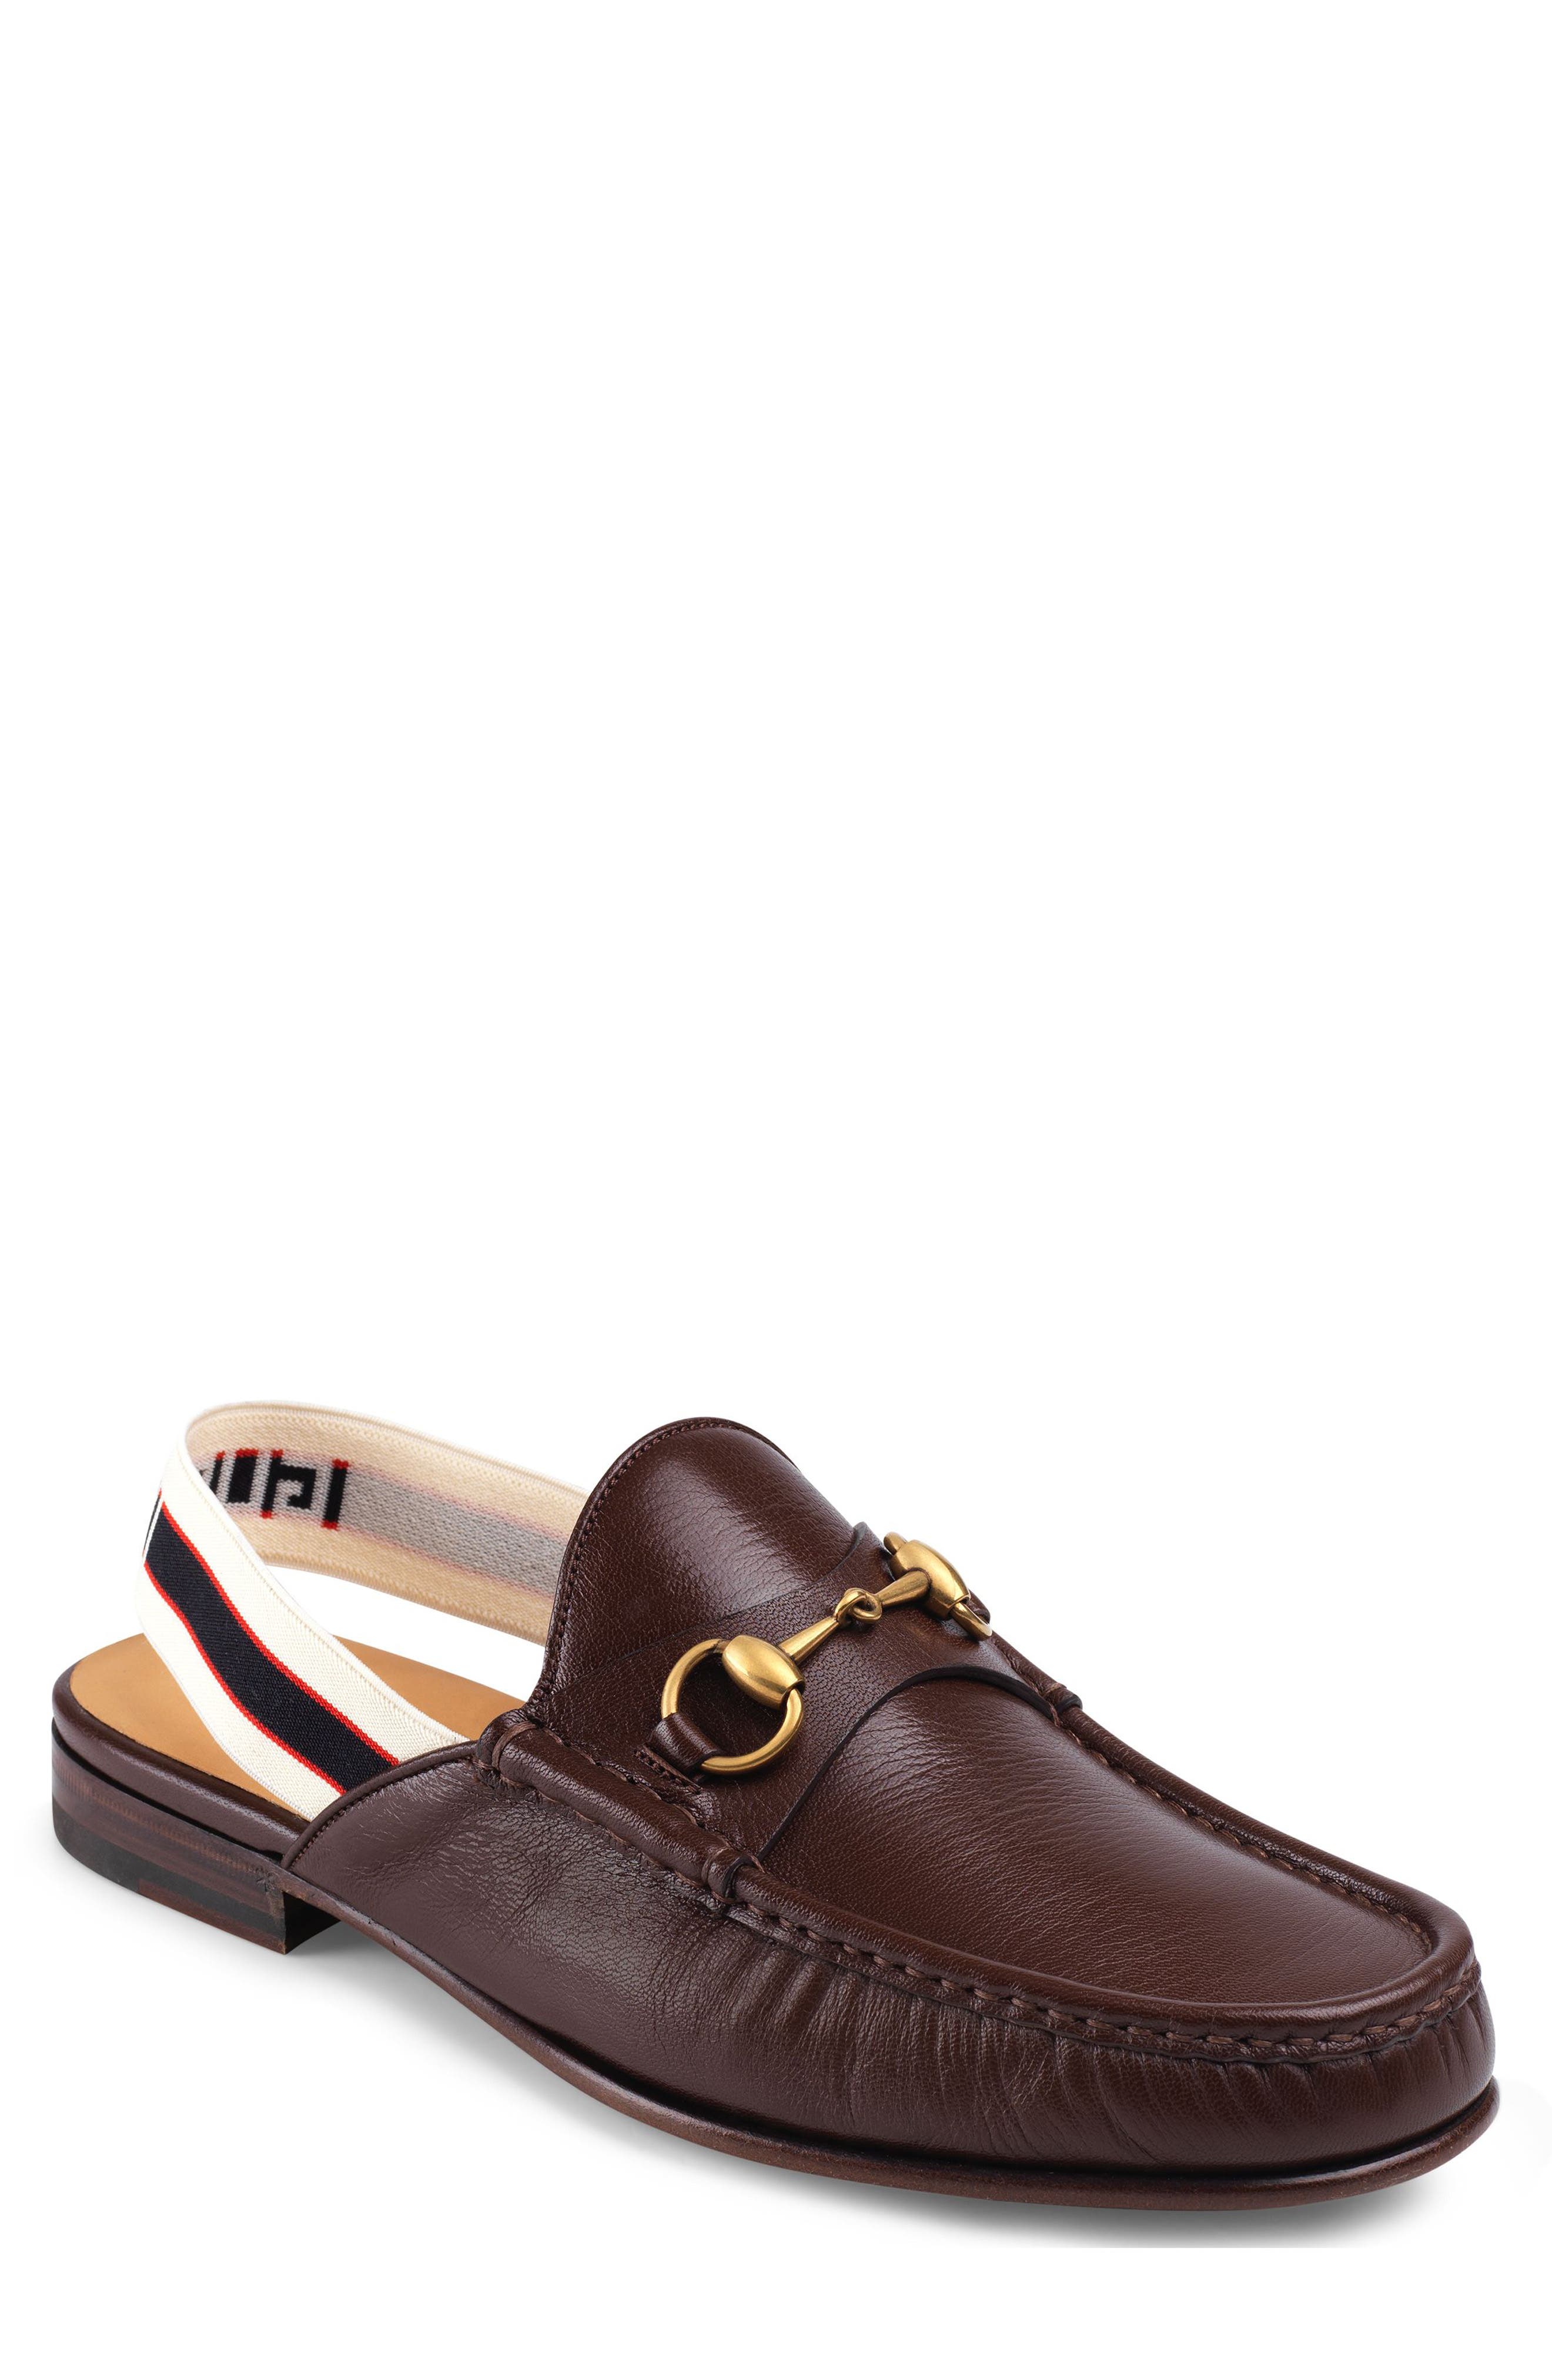 mens mules loafers